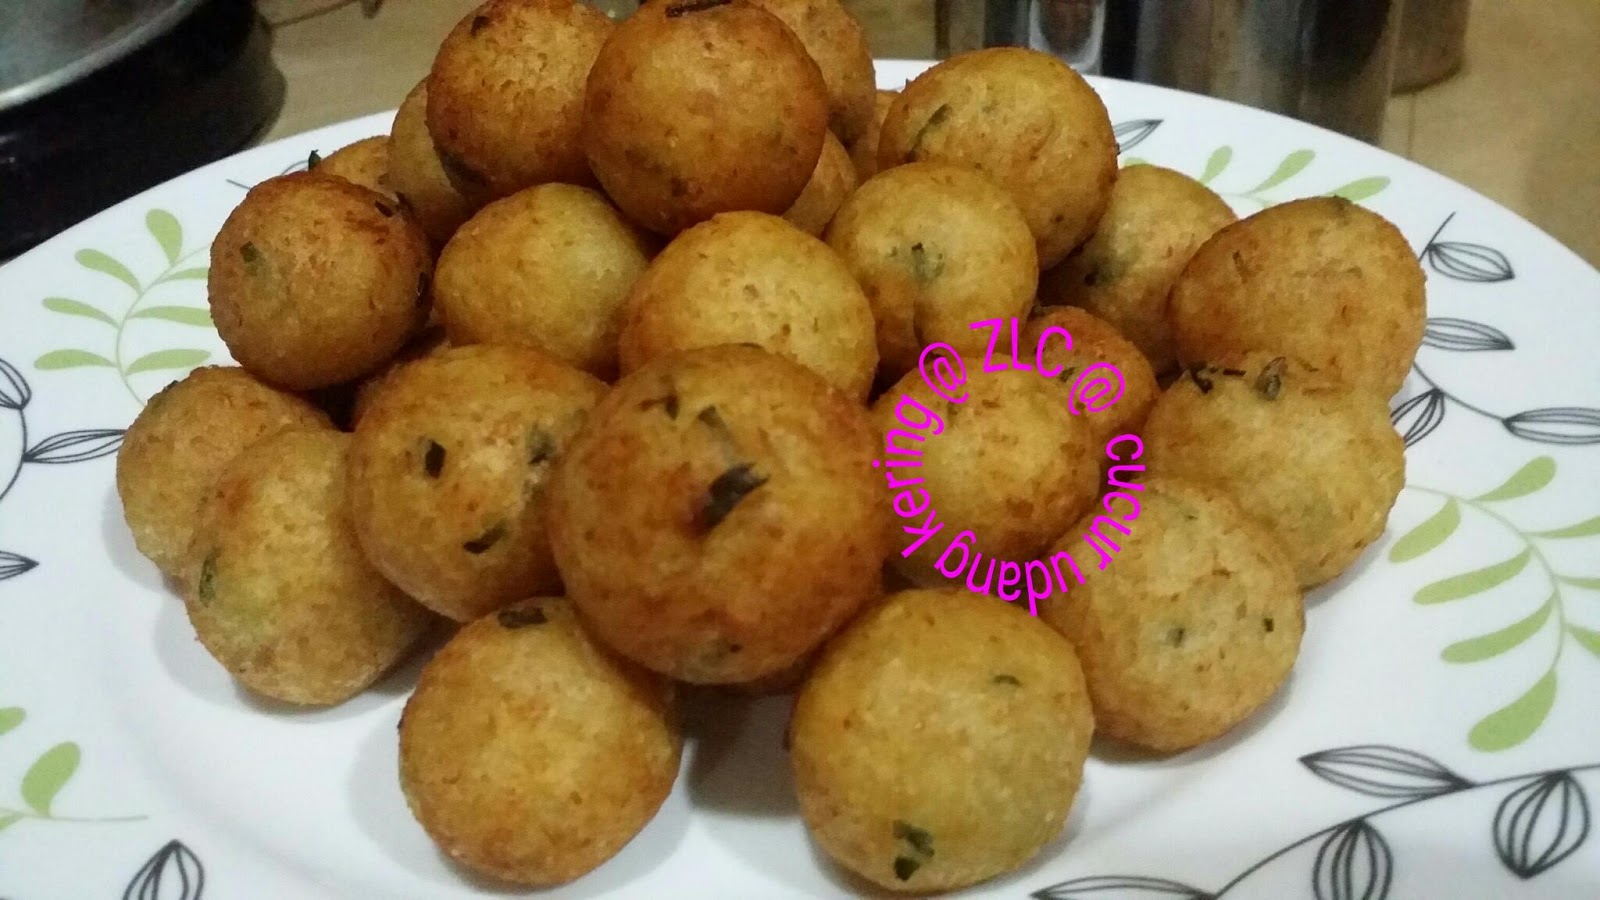 ZULFAZA LOVES COOKING: Cucur udang kering